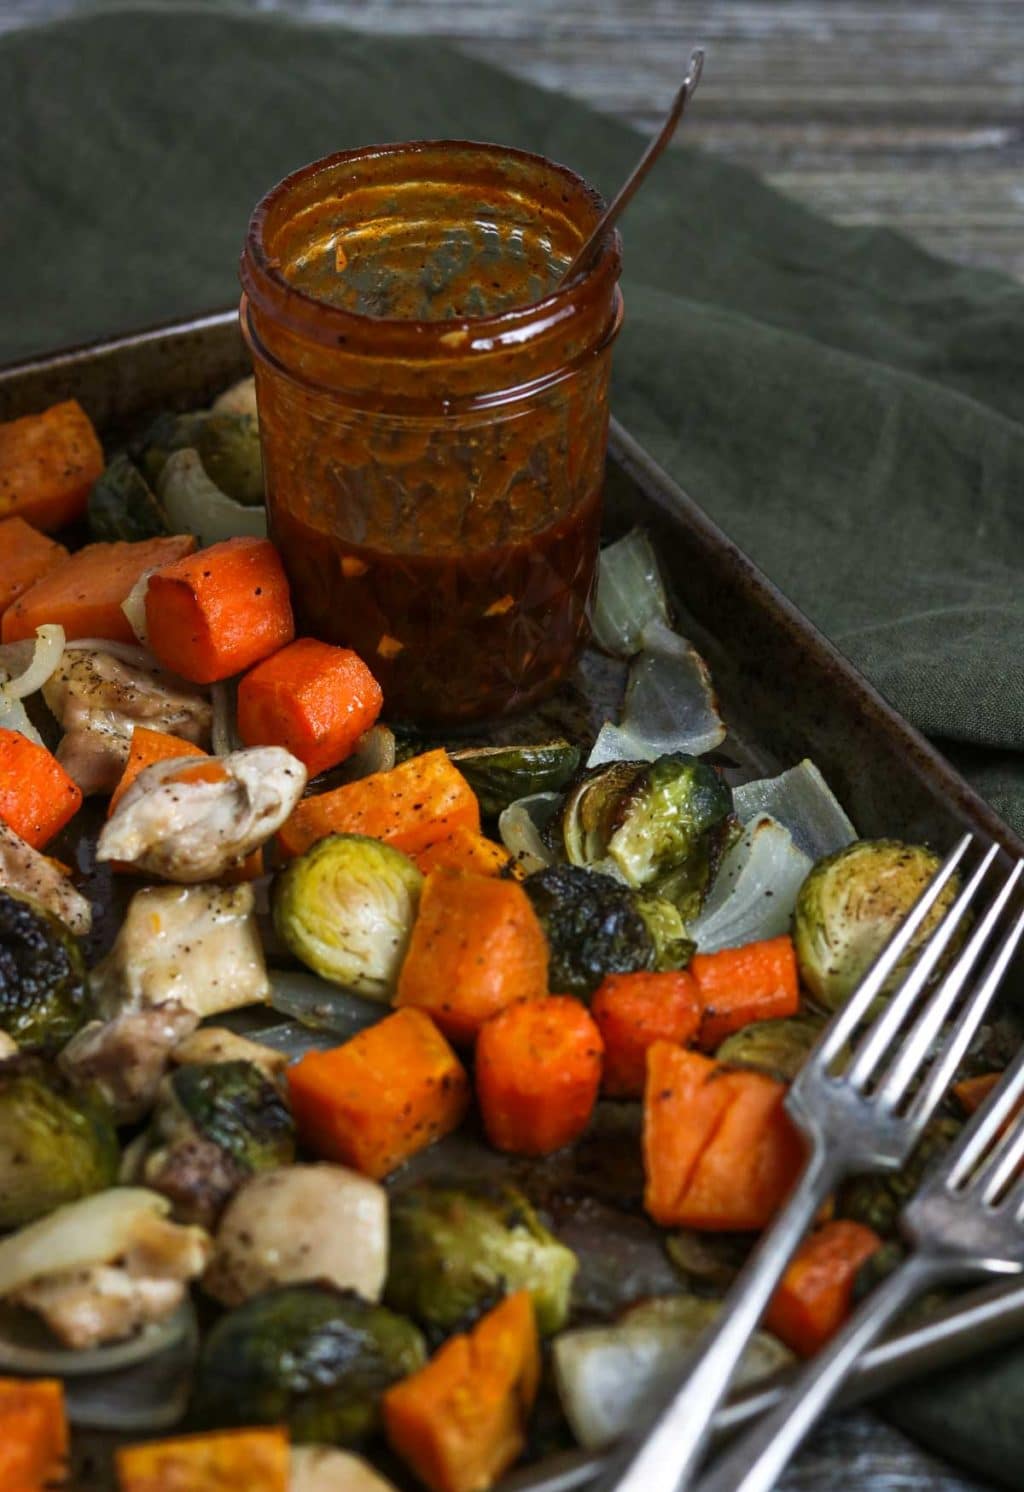 Sheet pan of roasted veggies and chicken with a mason jar of BBQ vinaigrette and two forks